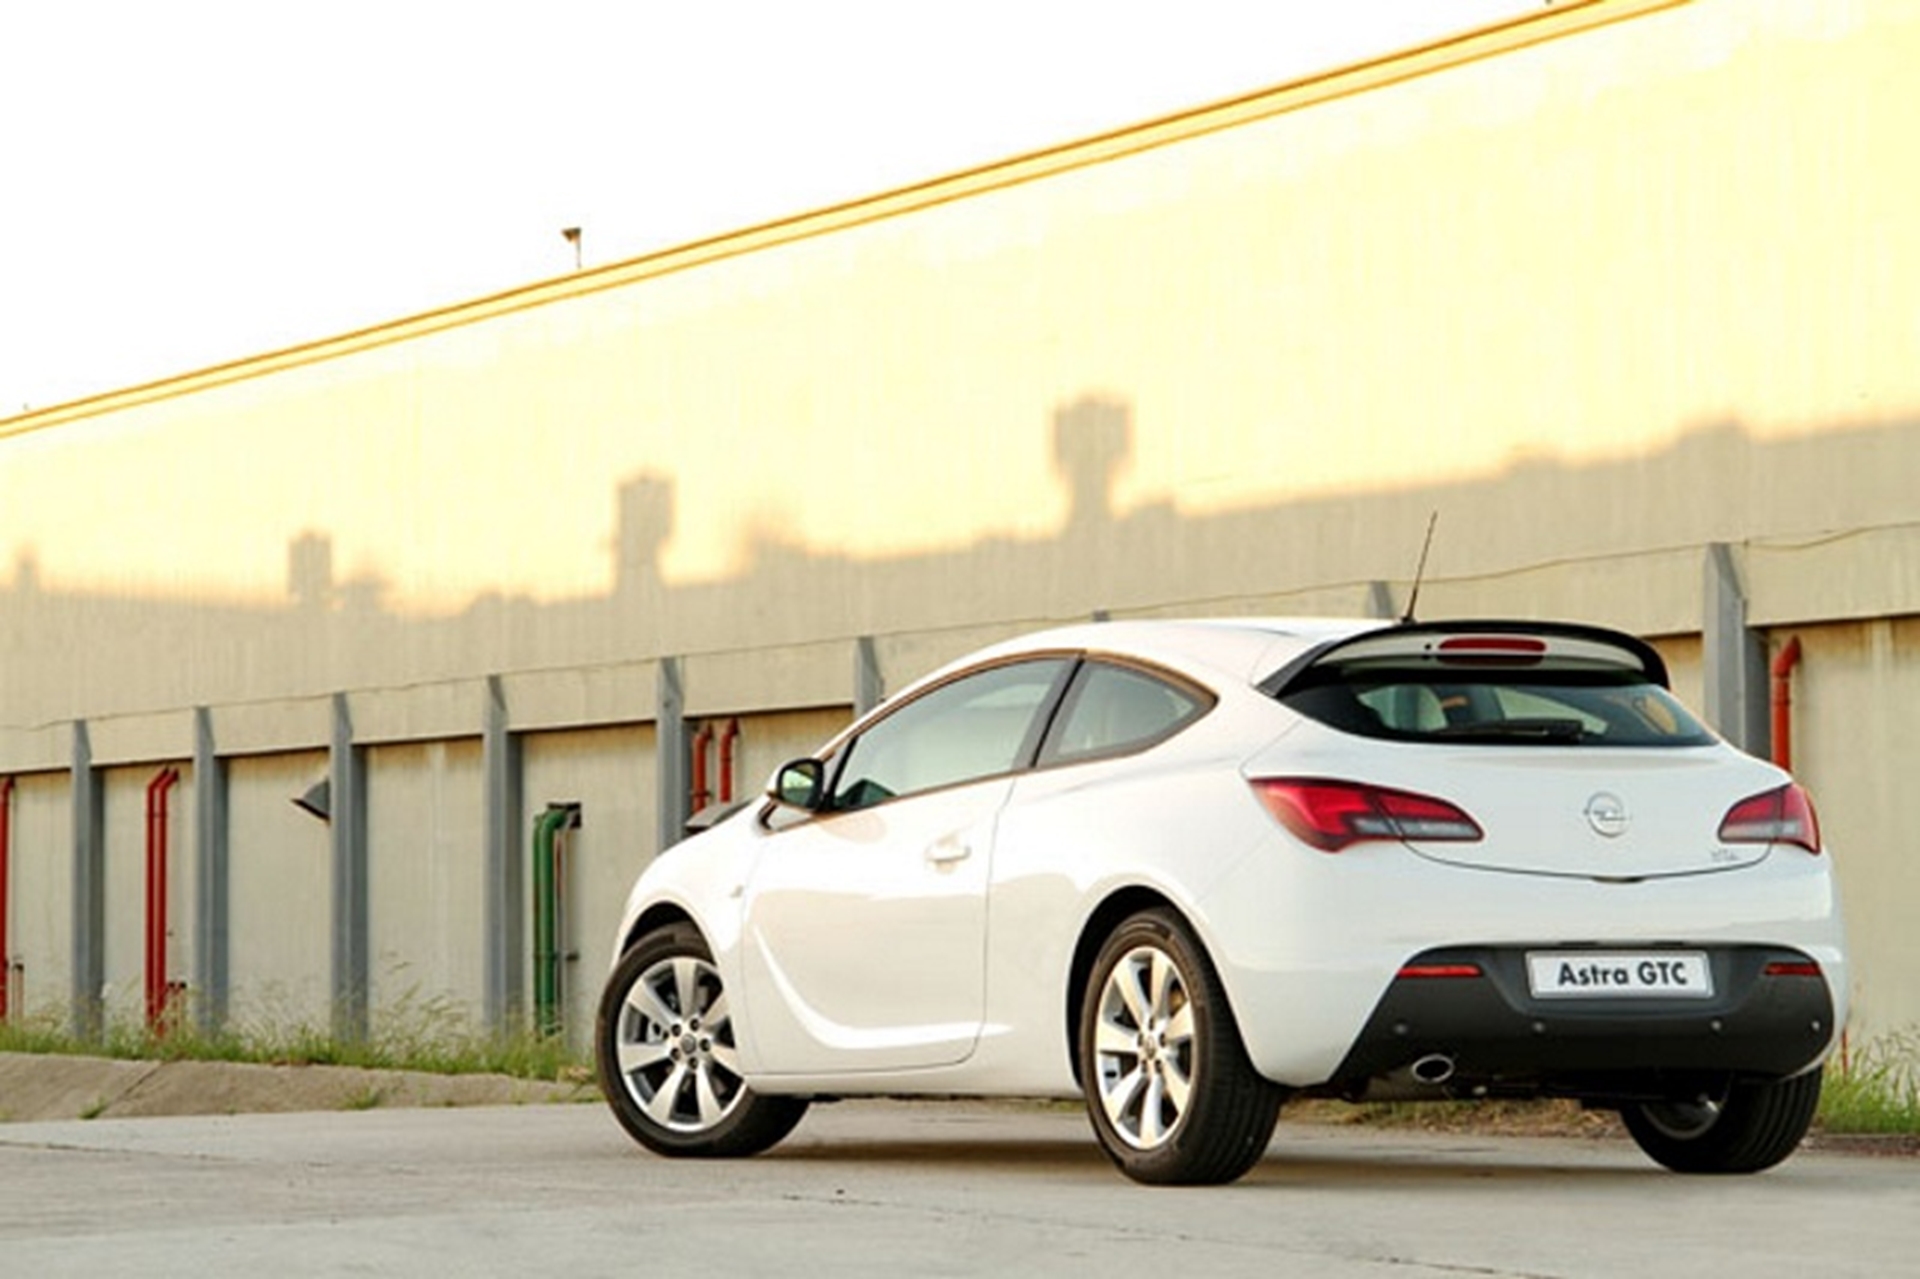 Sharp Looks for Astra GTC Take Opel Design Language To The Next Level